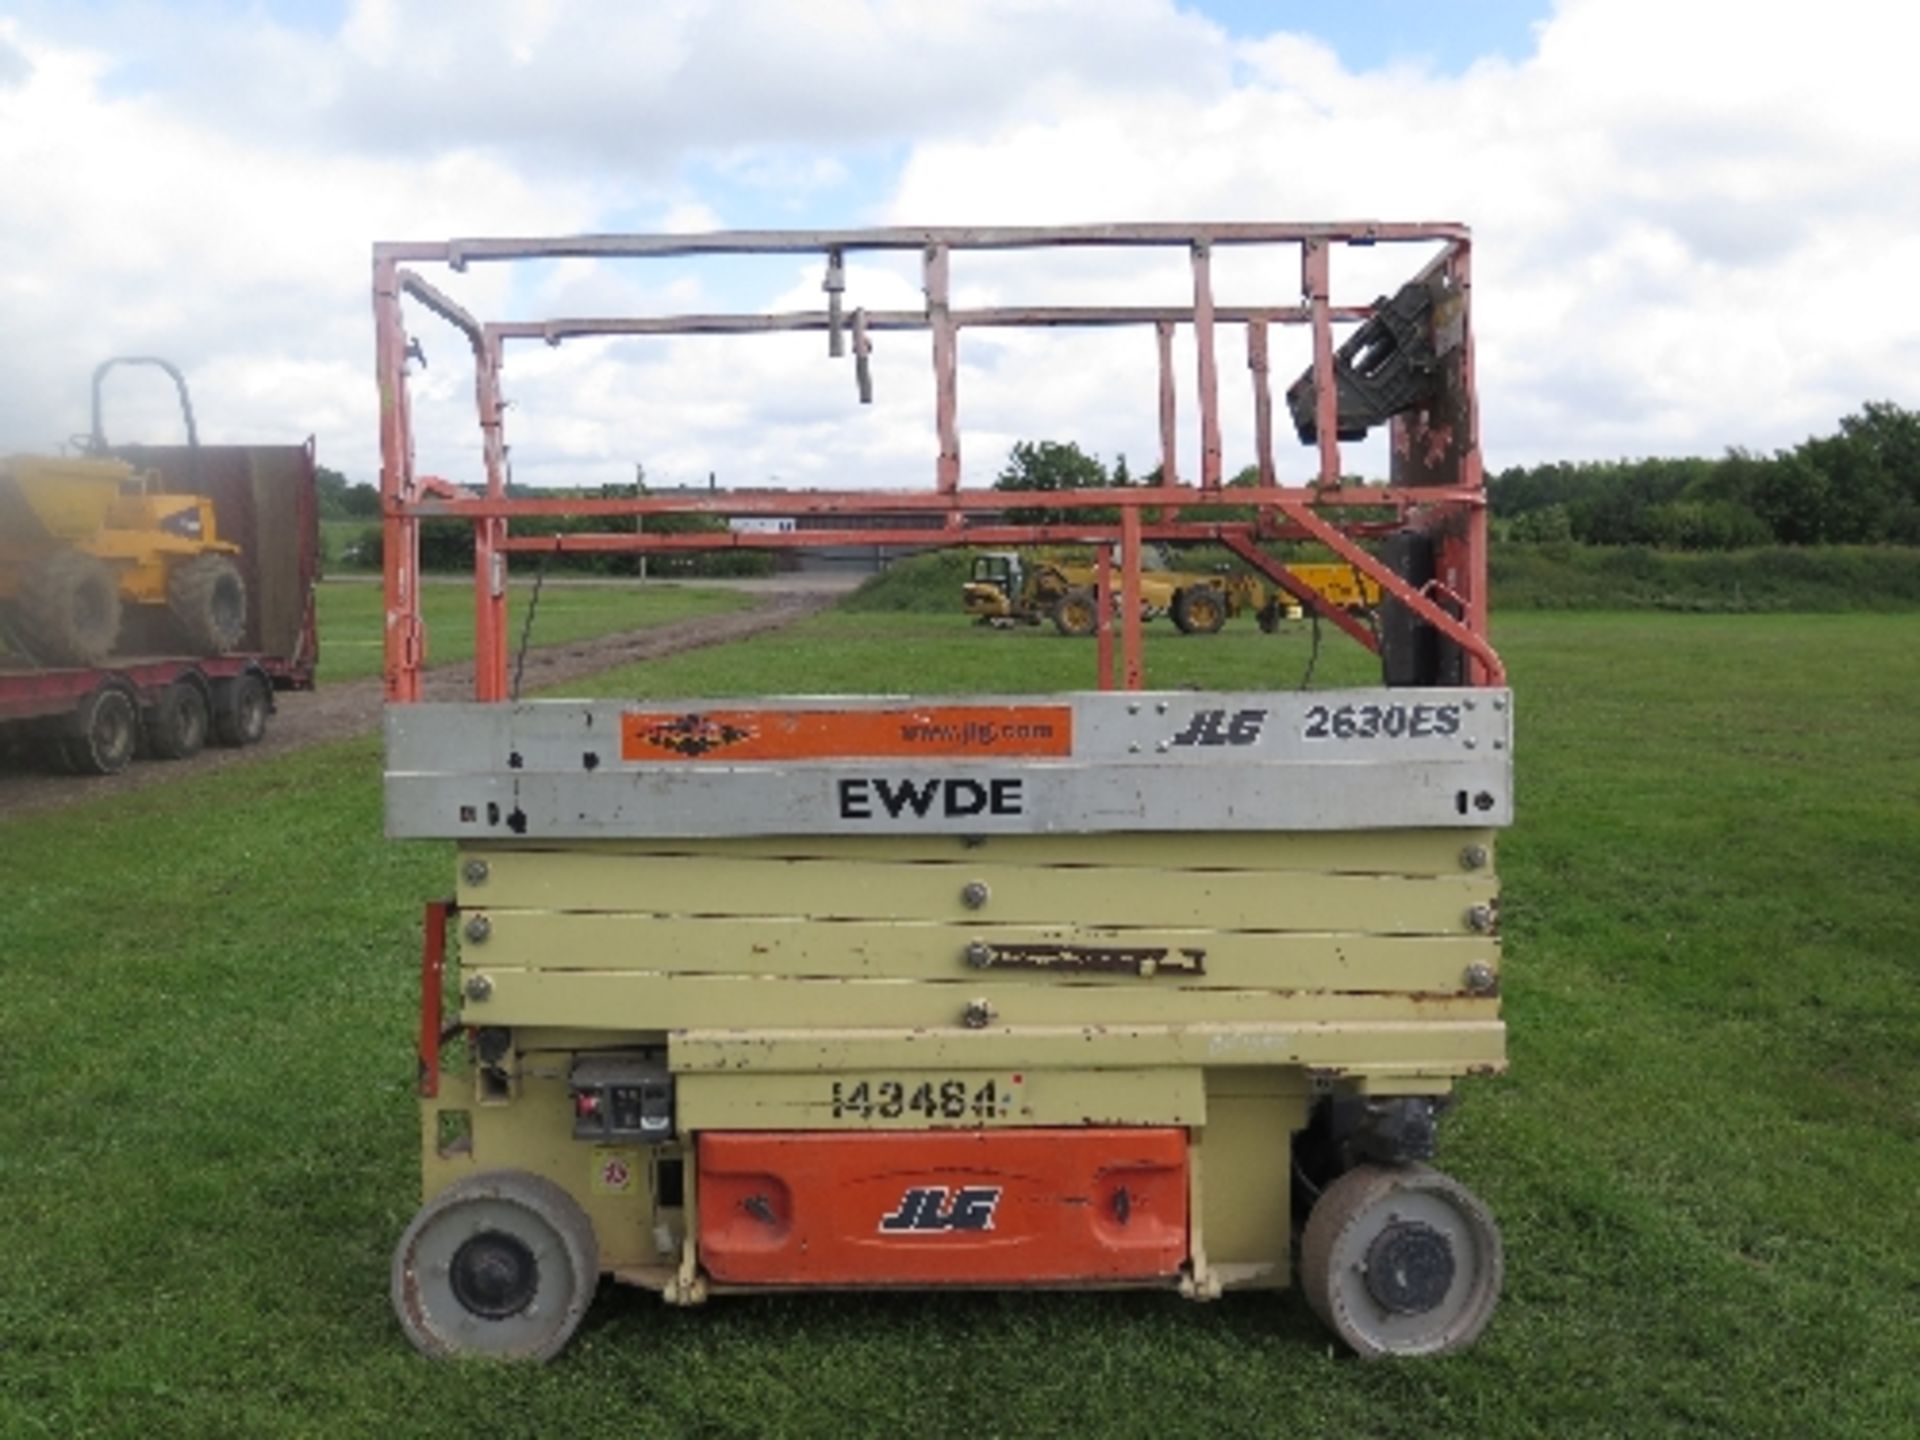 JLG 2630ES scissor lift 361 hrs 2006 143484
ALL OK
ALL LOTS are SOLD AS SEEN WITHOUT WARRANTY